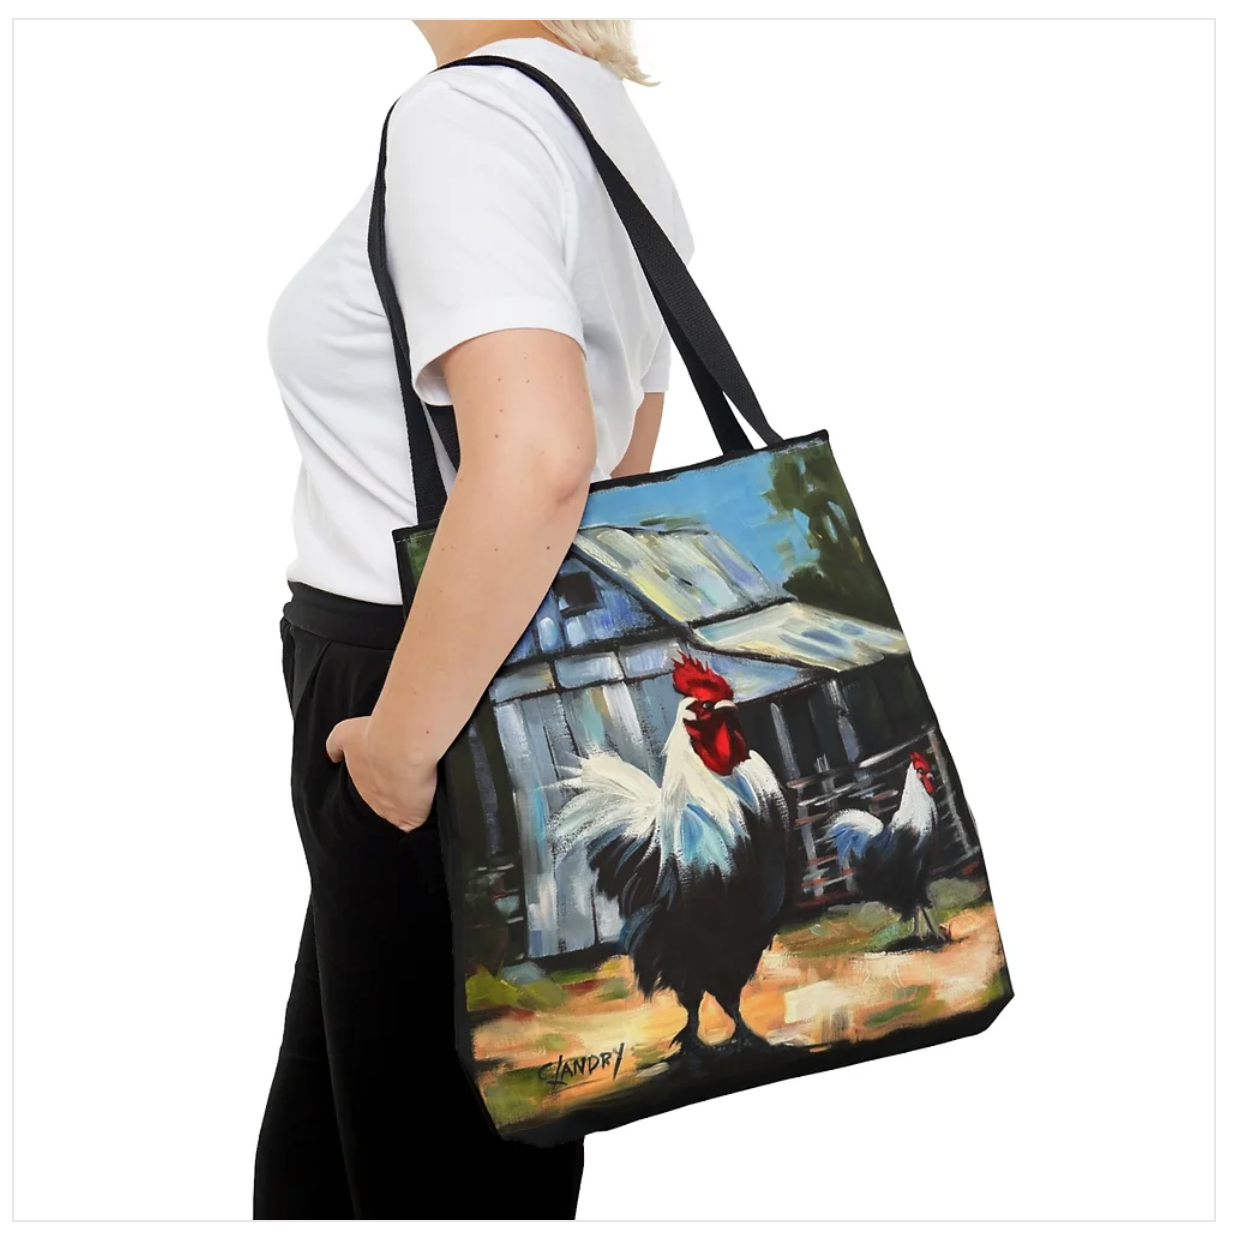 Tote Bag, Large, 16"x 17", Painting on front by Artist Carol Landry